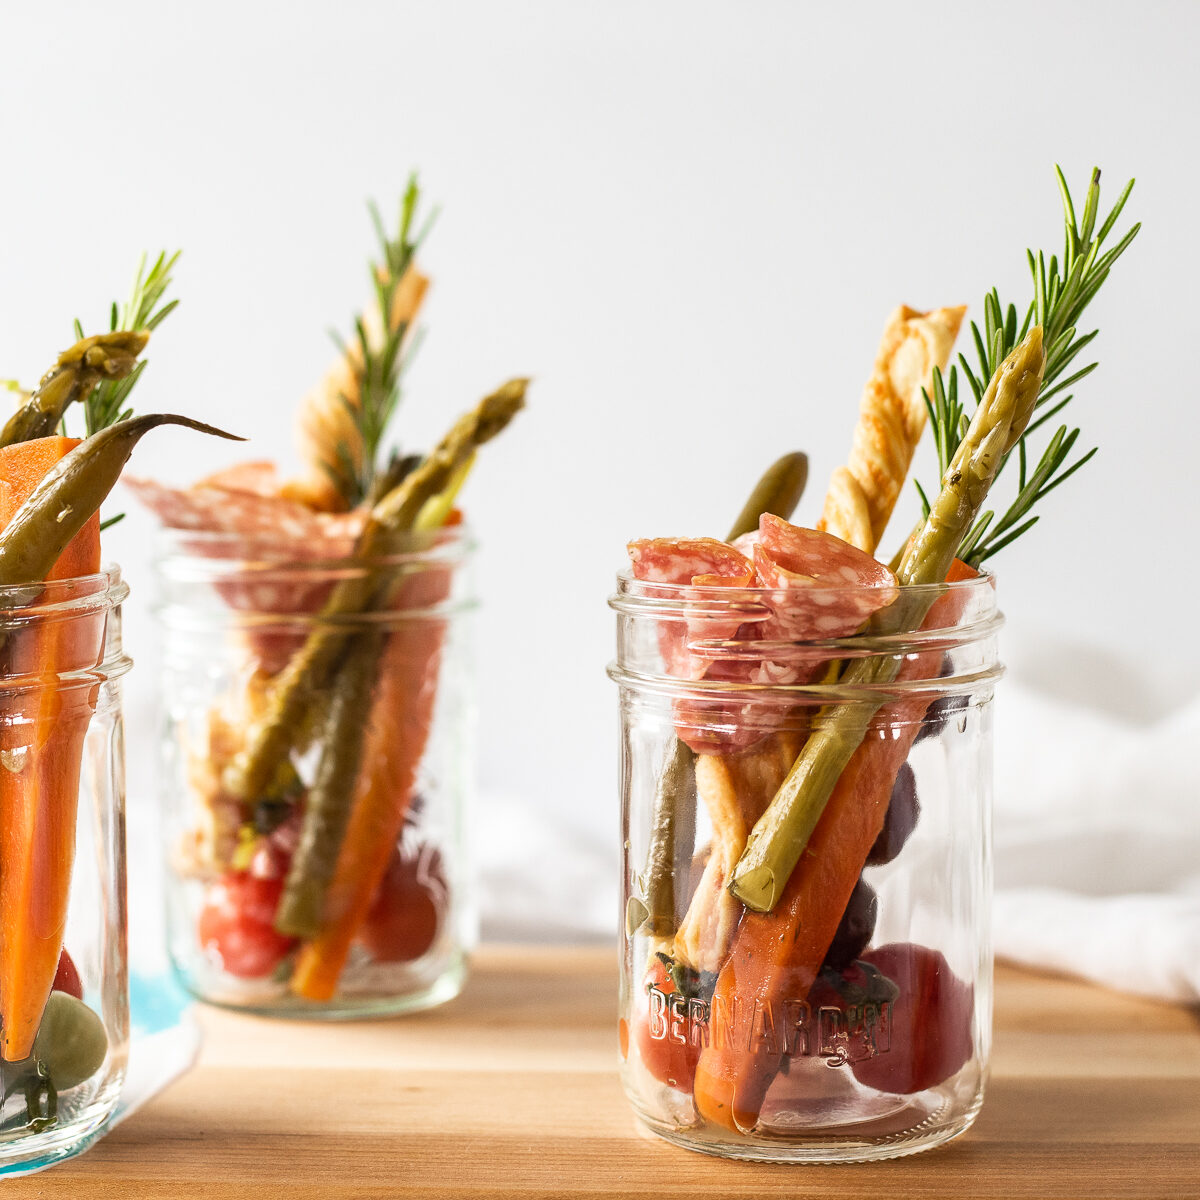 3 Small mason jars filled with sliced meat, pickled vegetables, bread sticks and rosemary sprigs.